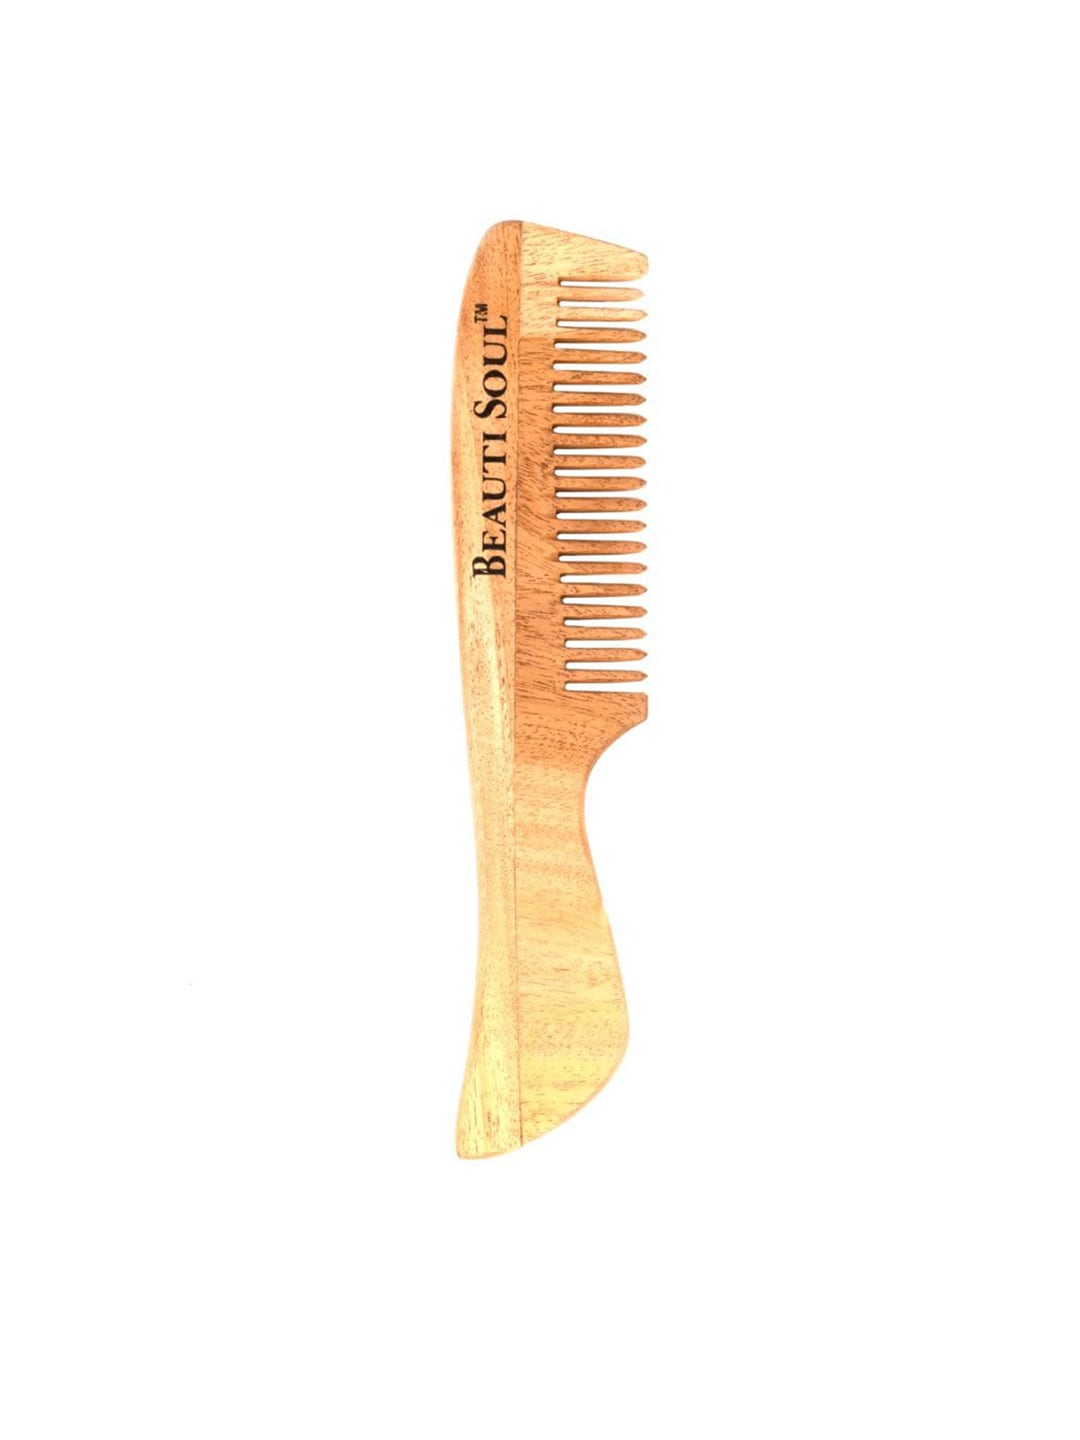 Beautisoul Unisex Brown Organic Neem Wood Comb with Handle Price in India